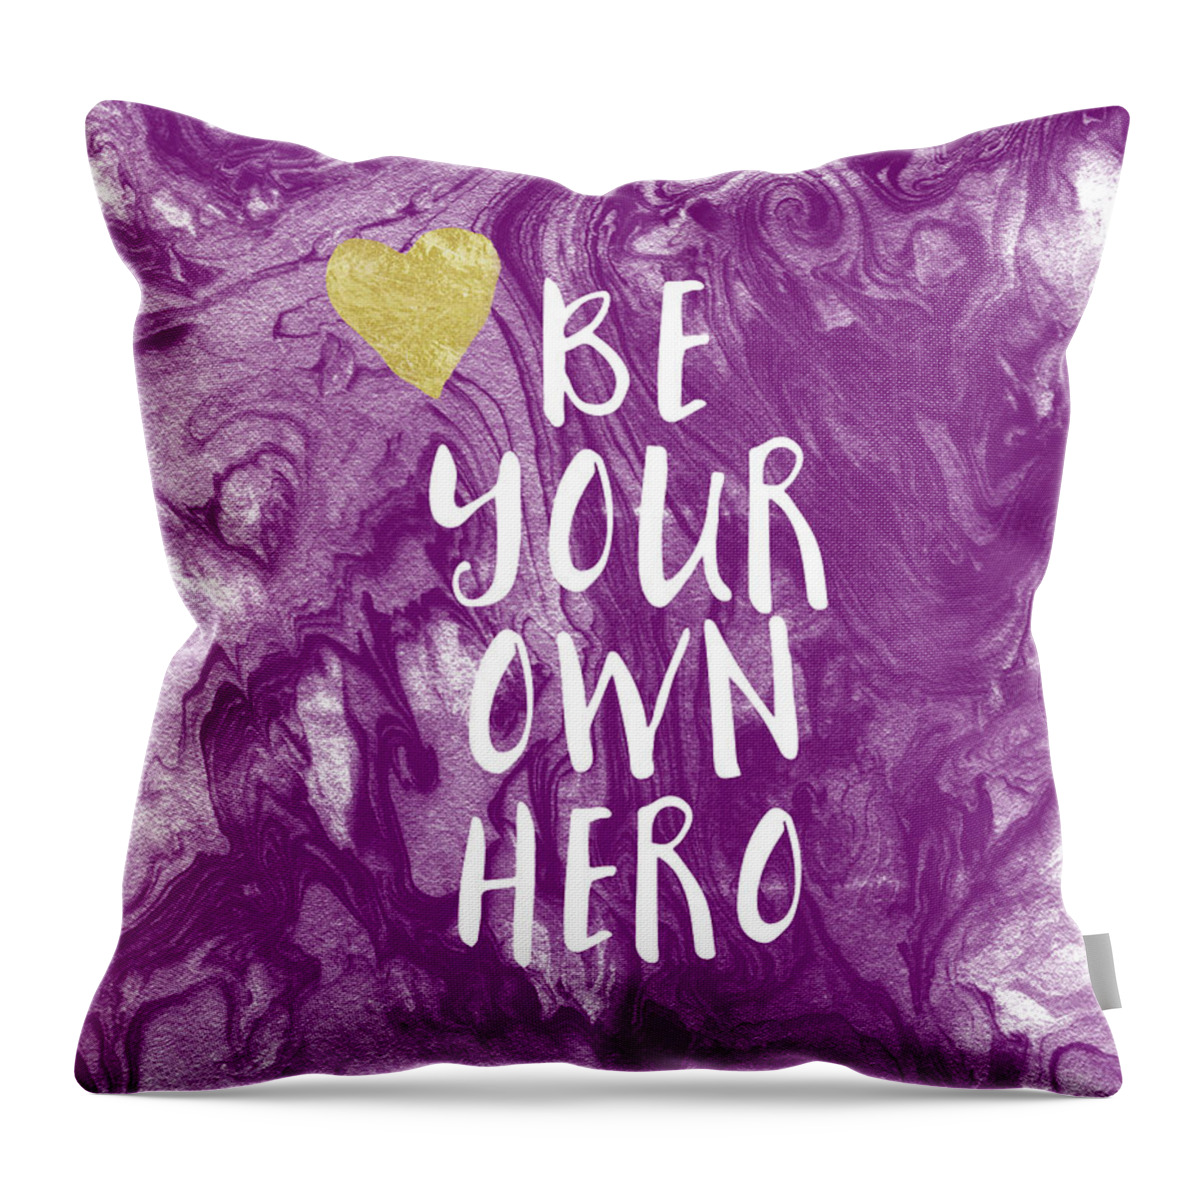 Inspirational Throw Pillow featuring the mixed media Be Your Own Hero - Inspirational Art by Linda Woods by Linda Woods